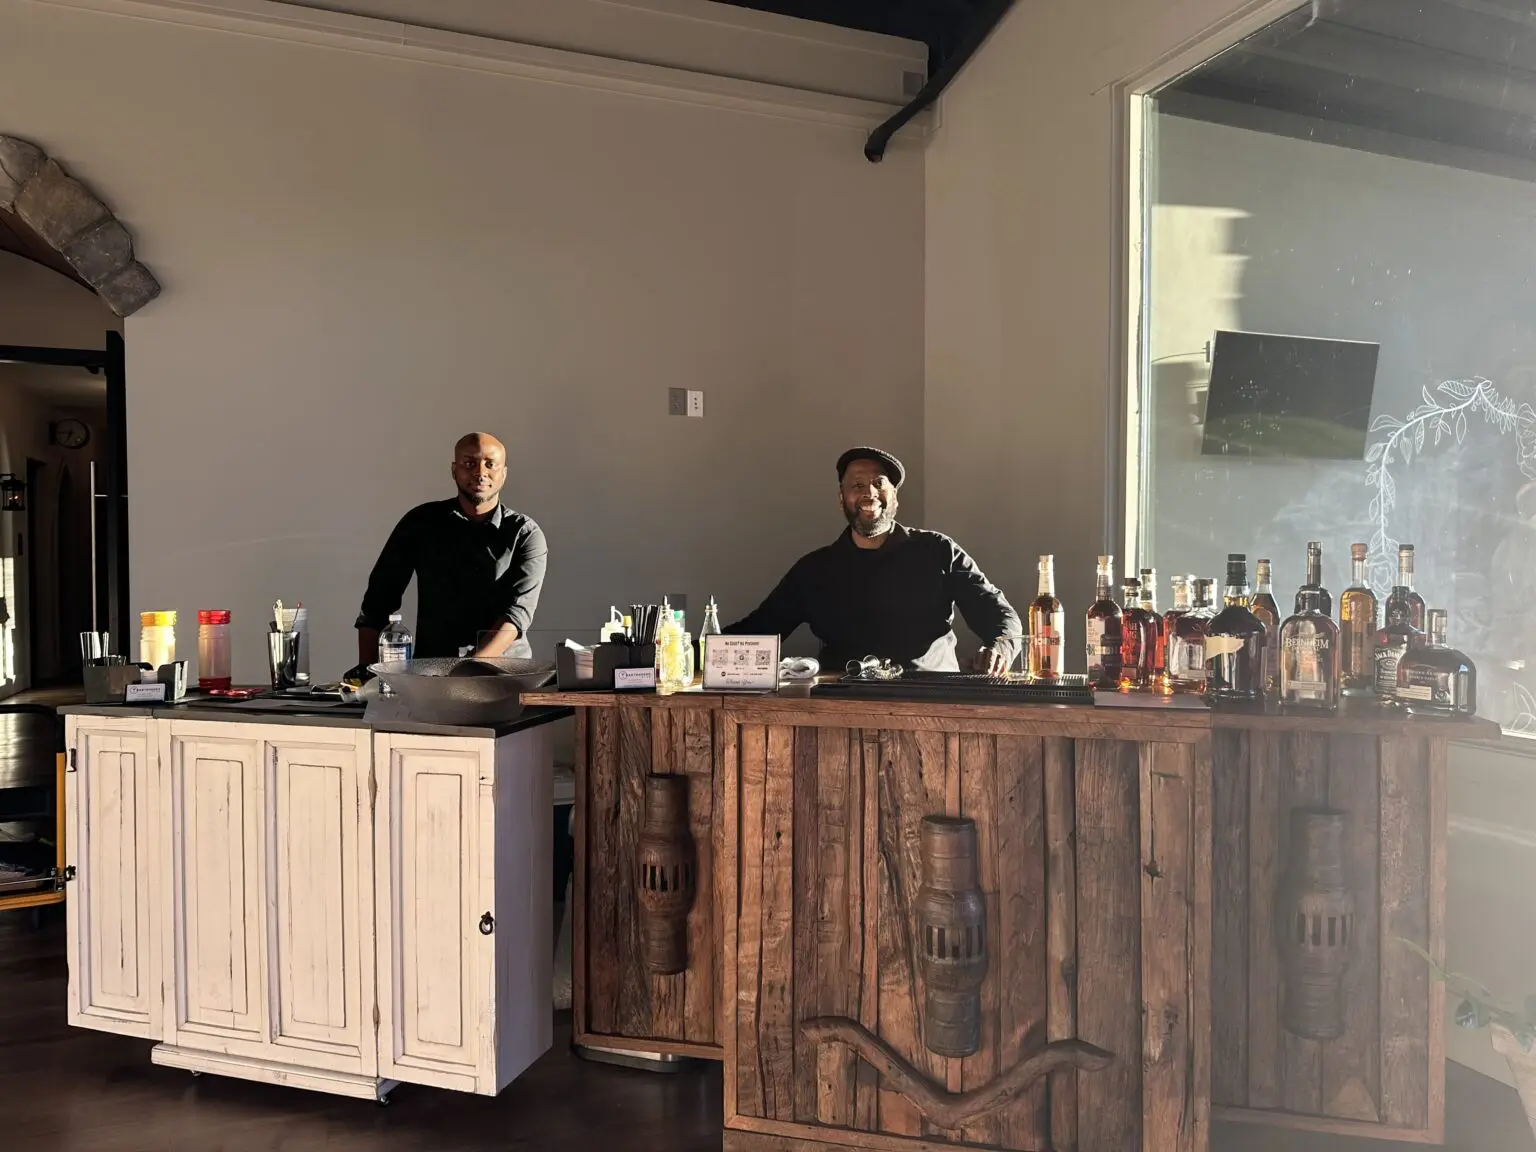 Two men standing behind a bar with bottles of alcohol.